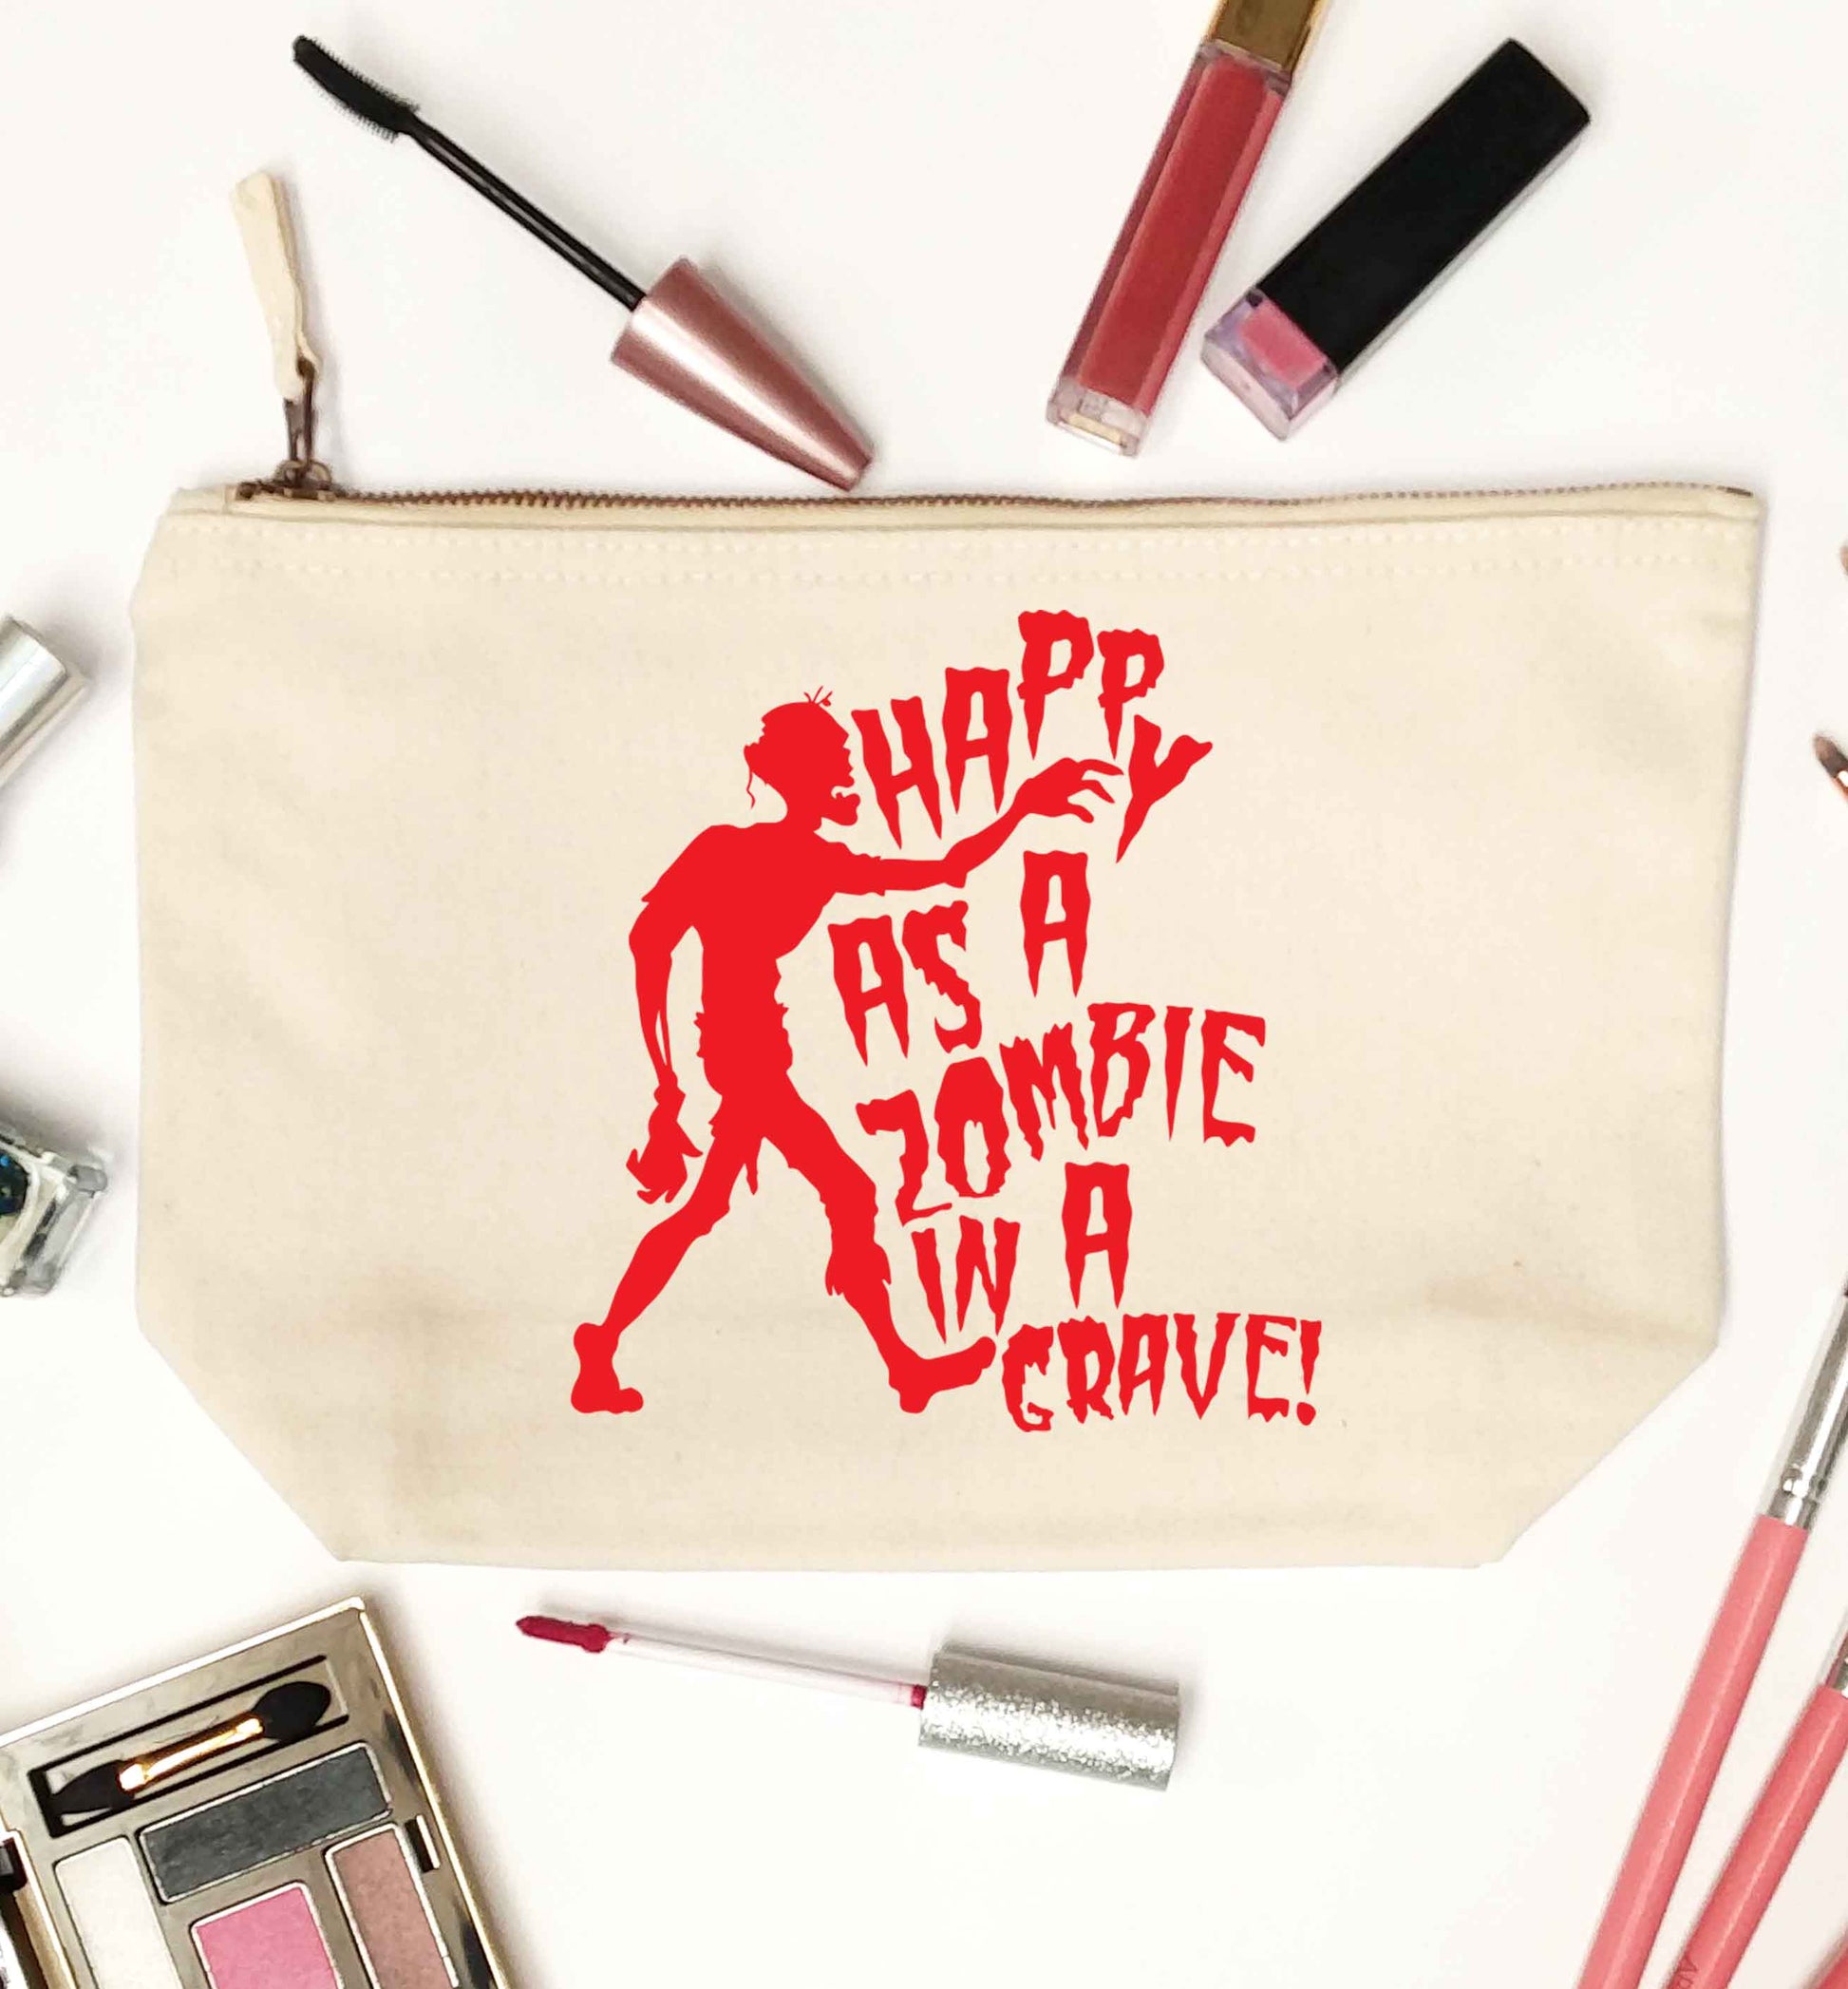 Happy as a zombie in a grave! natural makeup bag